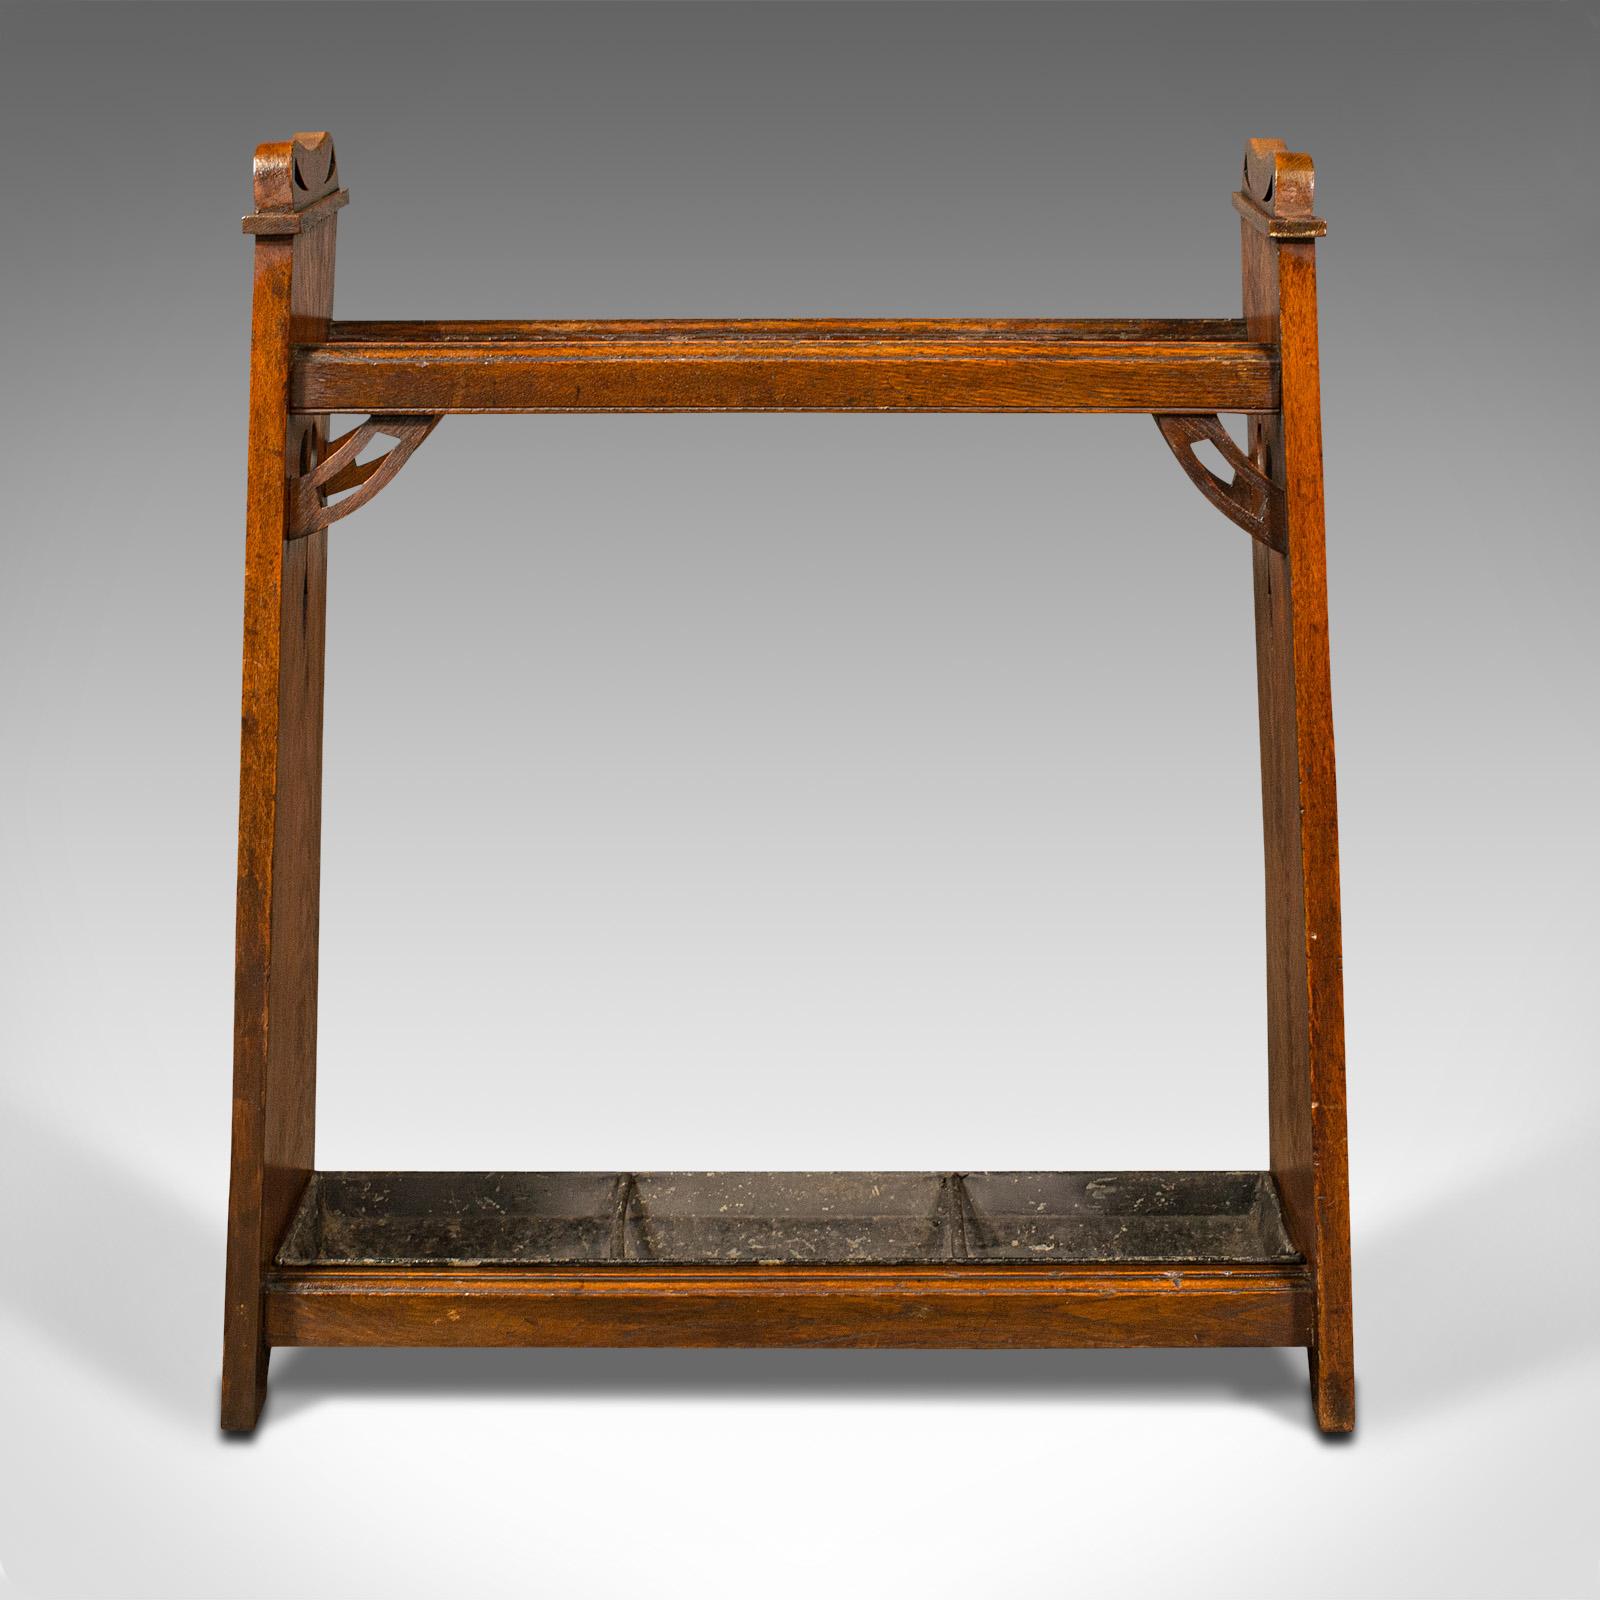 This is an antique Arts & Crafts stick stand. An English, oak hall rack in the manner of Liberty, dating to the Edwardian period, circa 1910.

Striking figuring and appealing Arts & Crafts movement taste
Displays a desirable aged patina and in